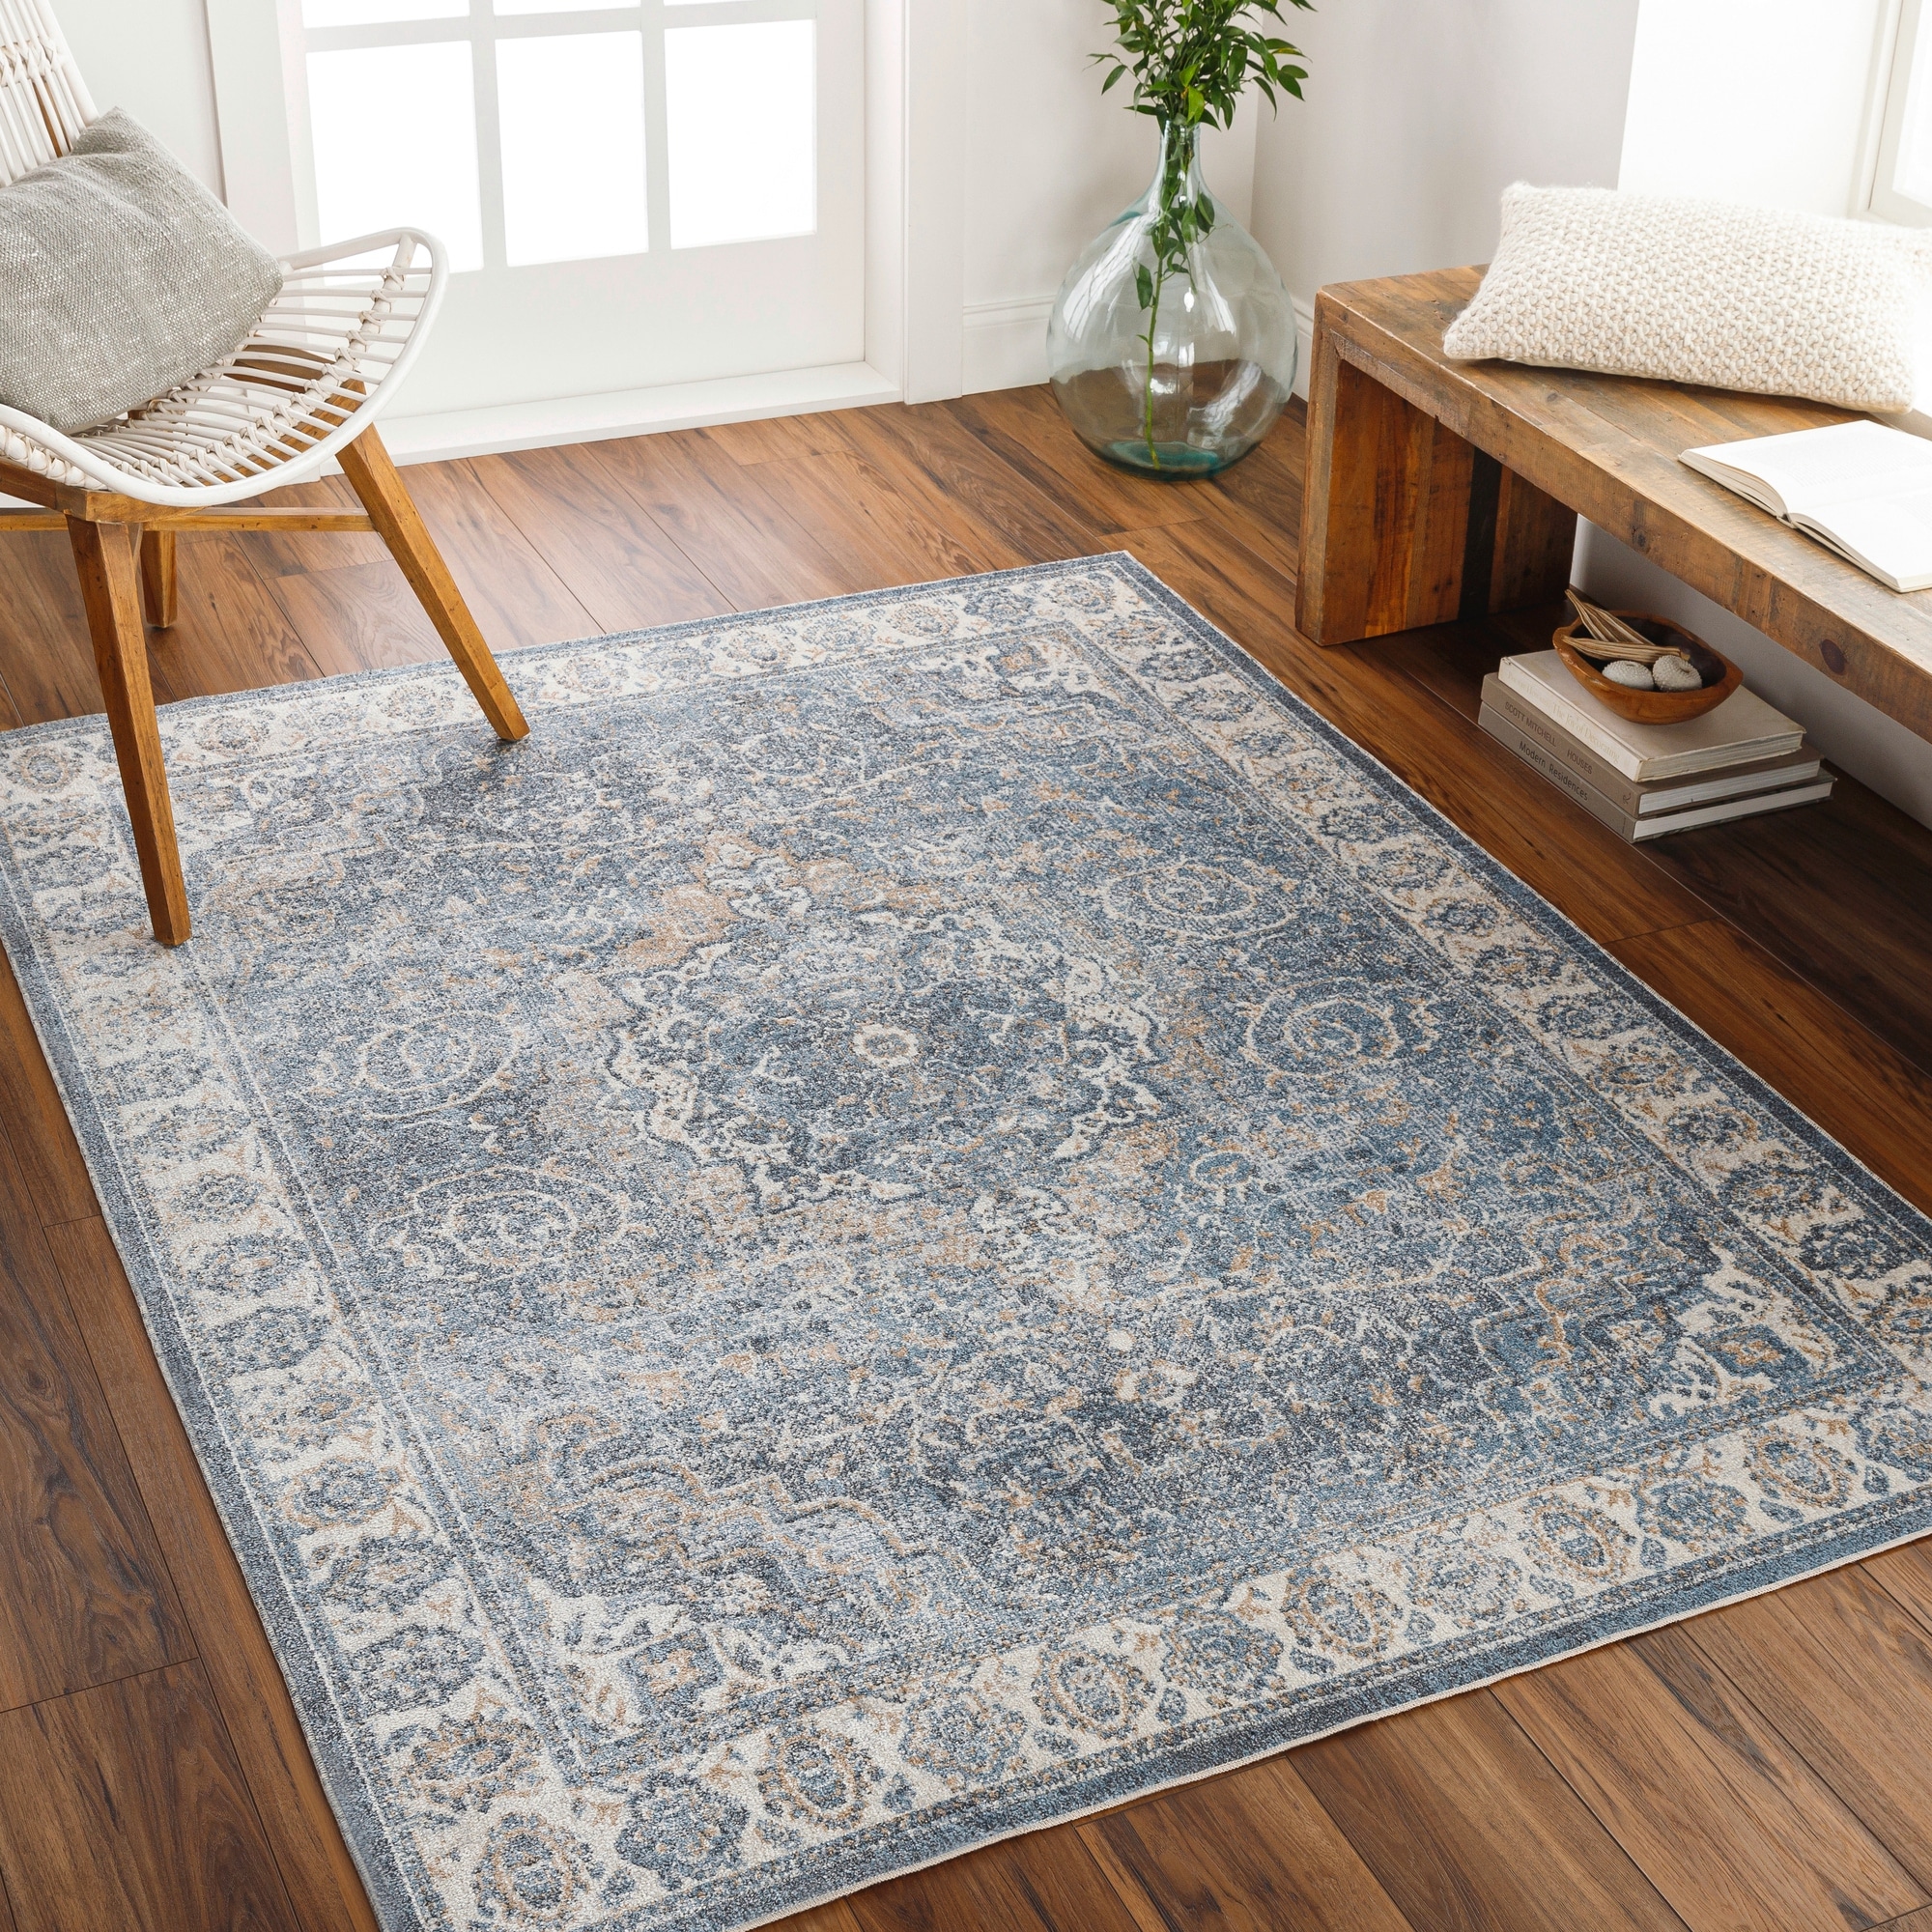 https://ak1.ostkcdn.com/images/products/is/images/direct/3c172911b3016cbc6ad4611c4999a7d1c67946ff/Lillian-Machine-Washable-Faded-Classic-Area-Rug.jpg